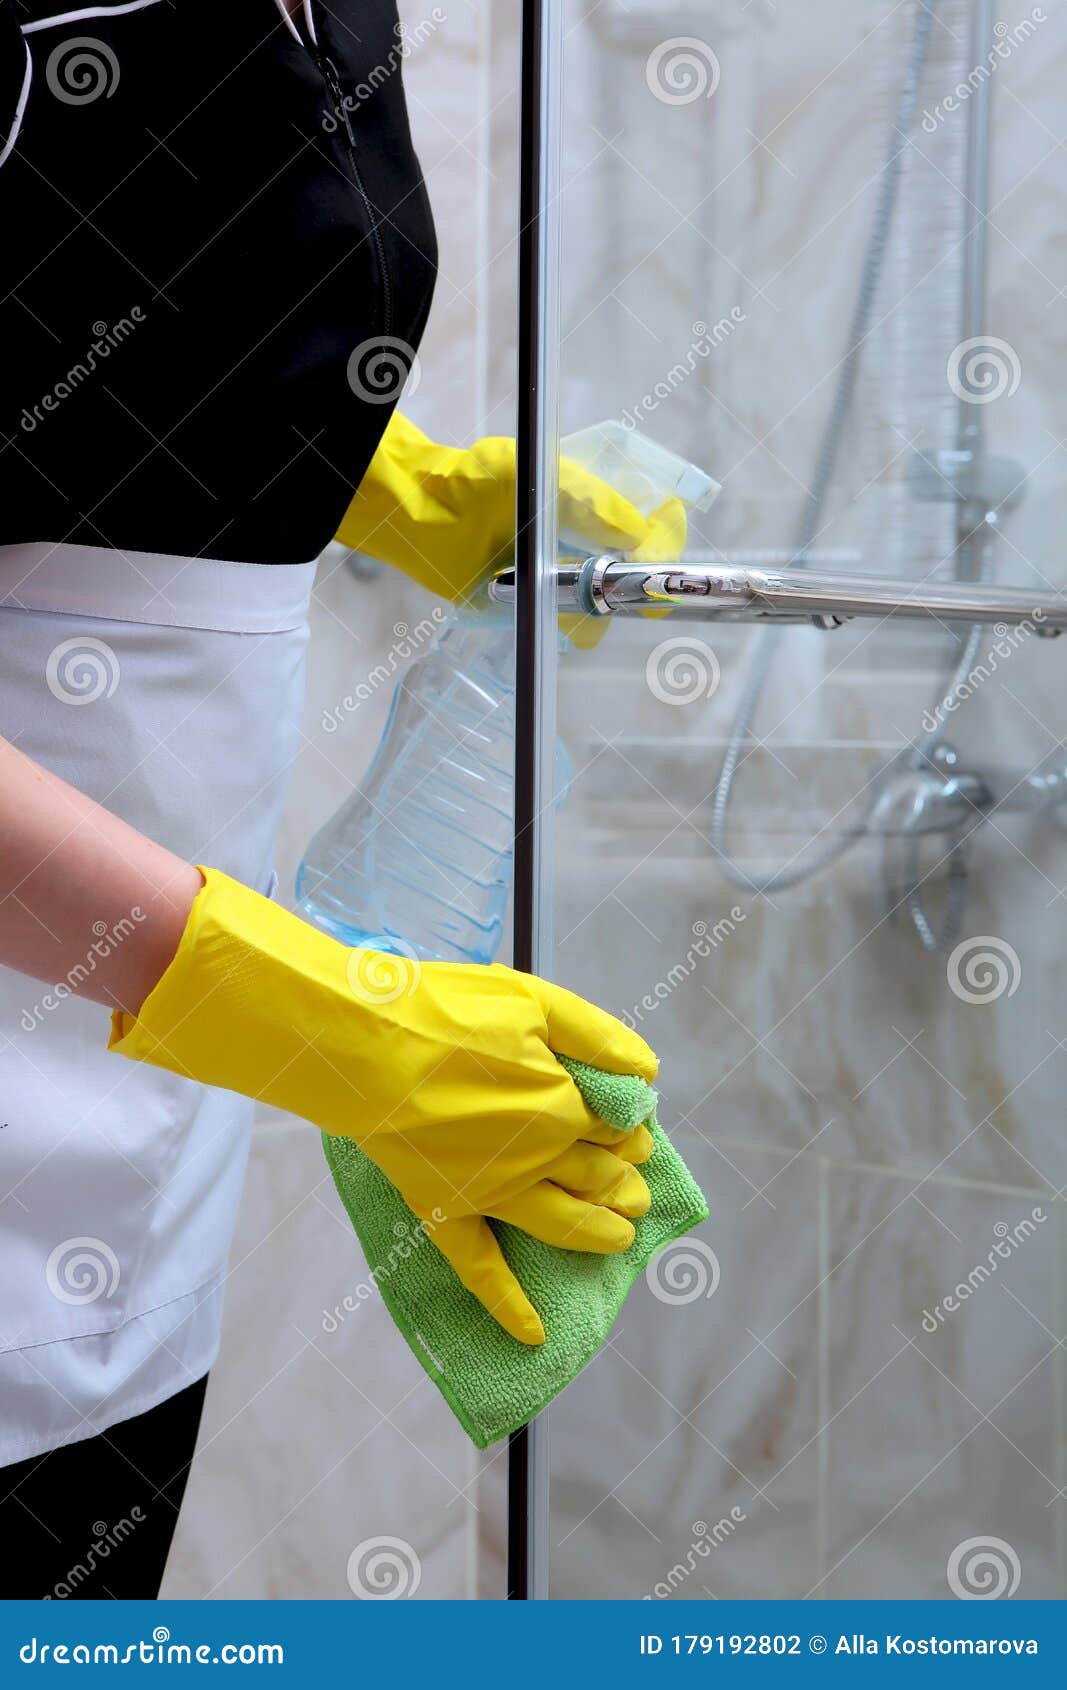 Cleaning Service In The Bathroom. An Unrecognizable Photo. The Concept ...